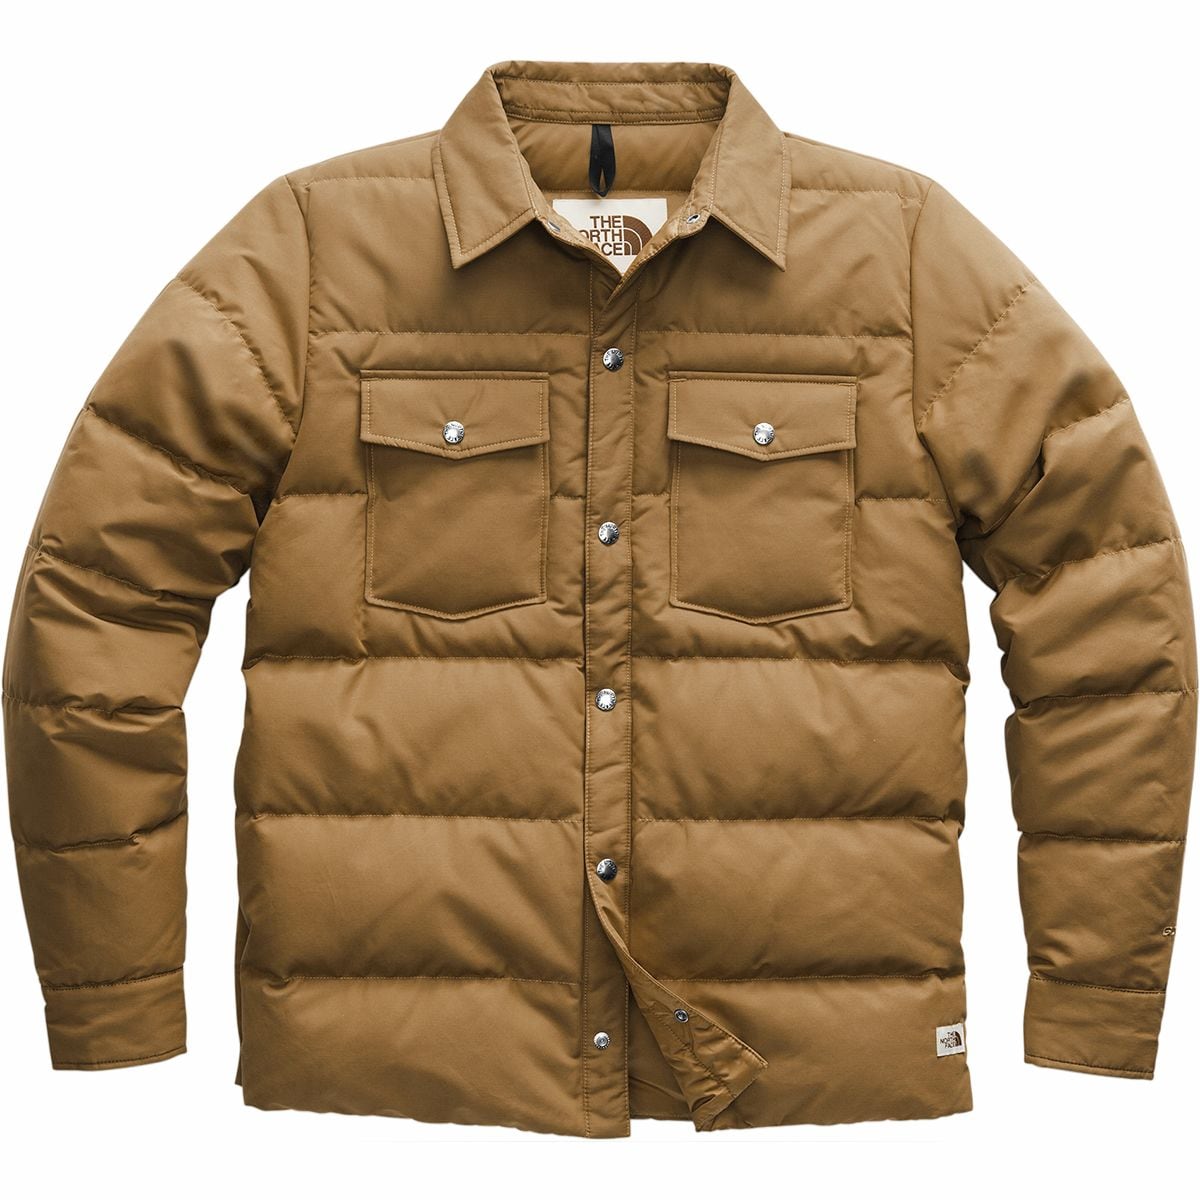 The North Face Down Sierra Snap Jacket - Men's - Clothing